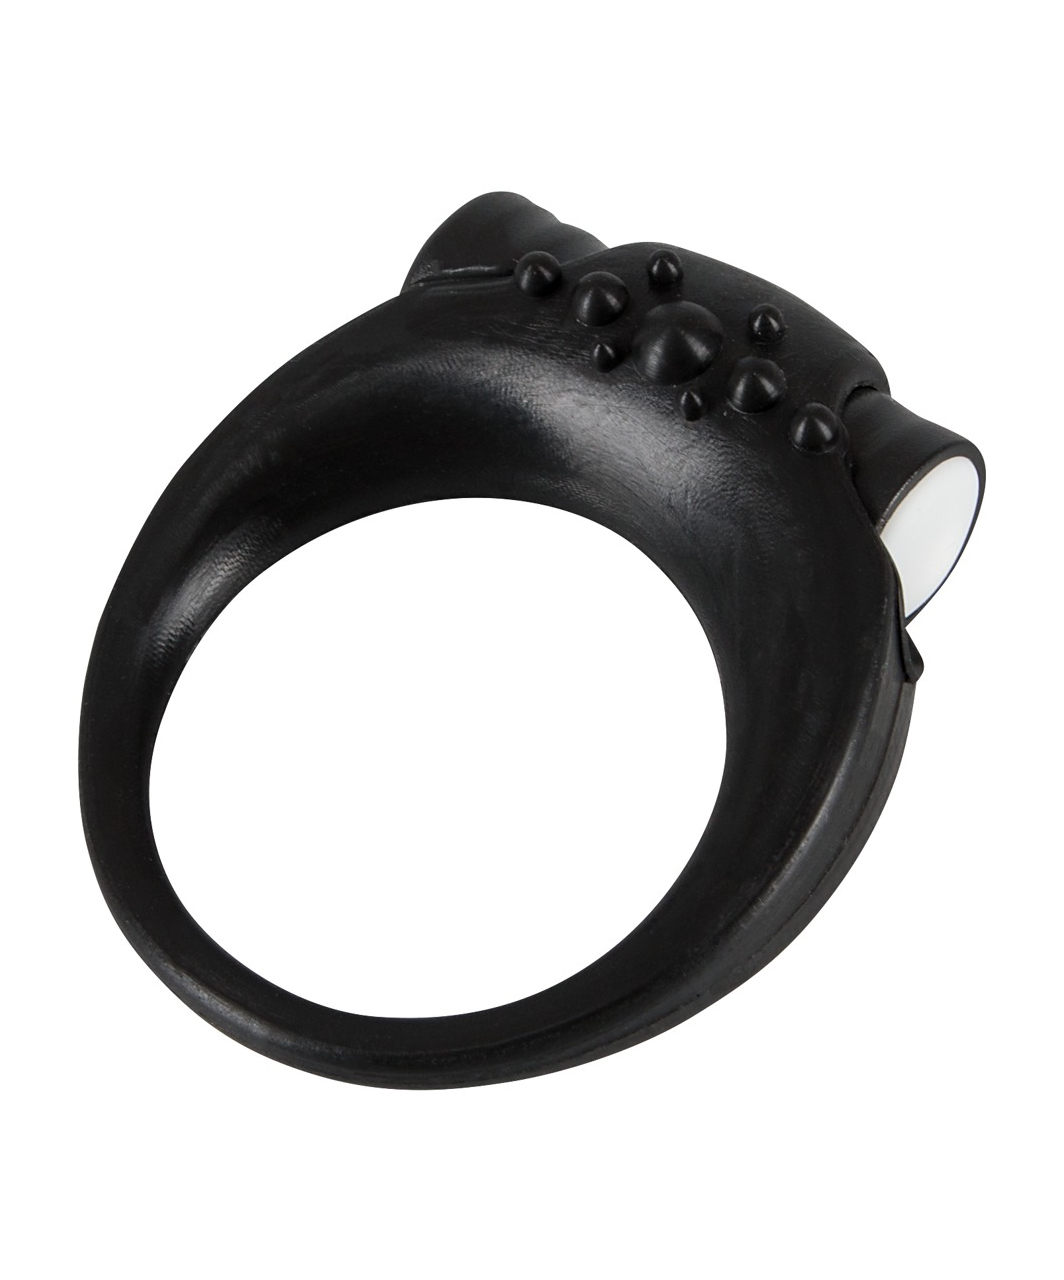 Smile Stayer Vibrating Cock Ring